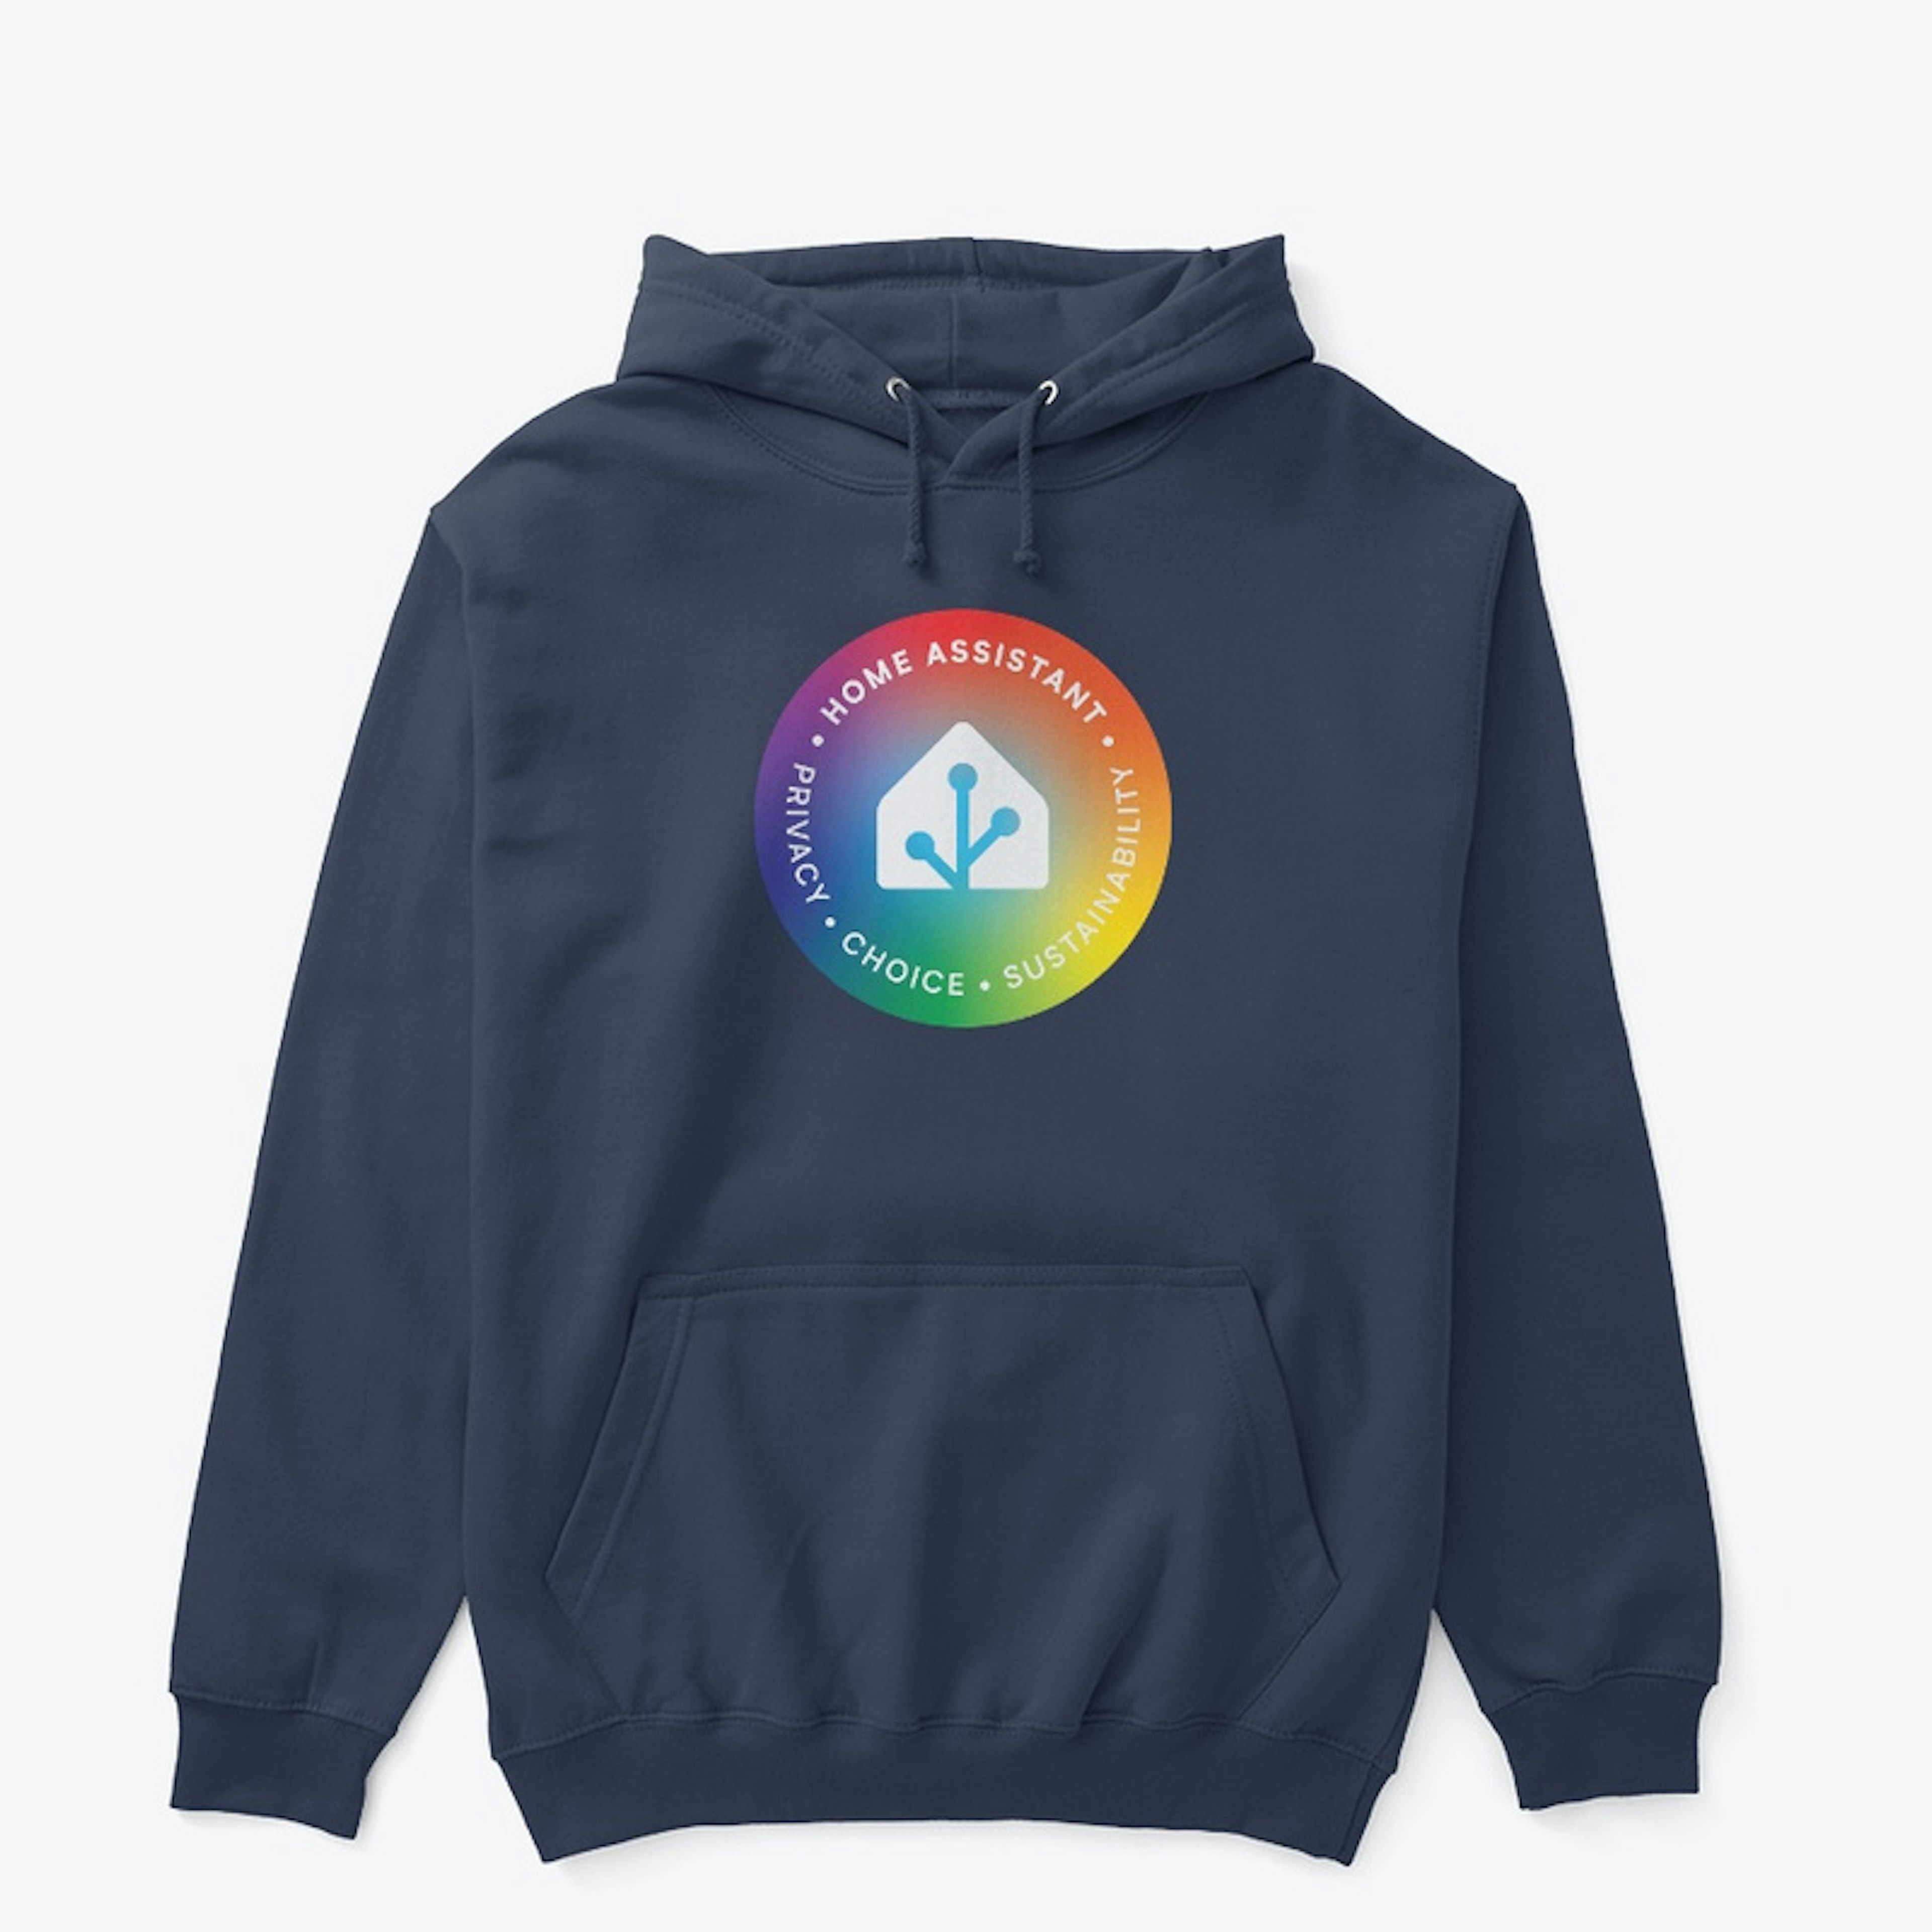 Home Assistant Rainbow Badge